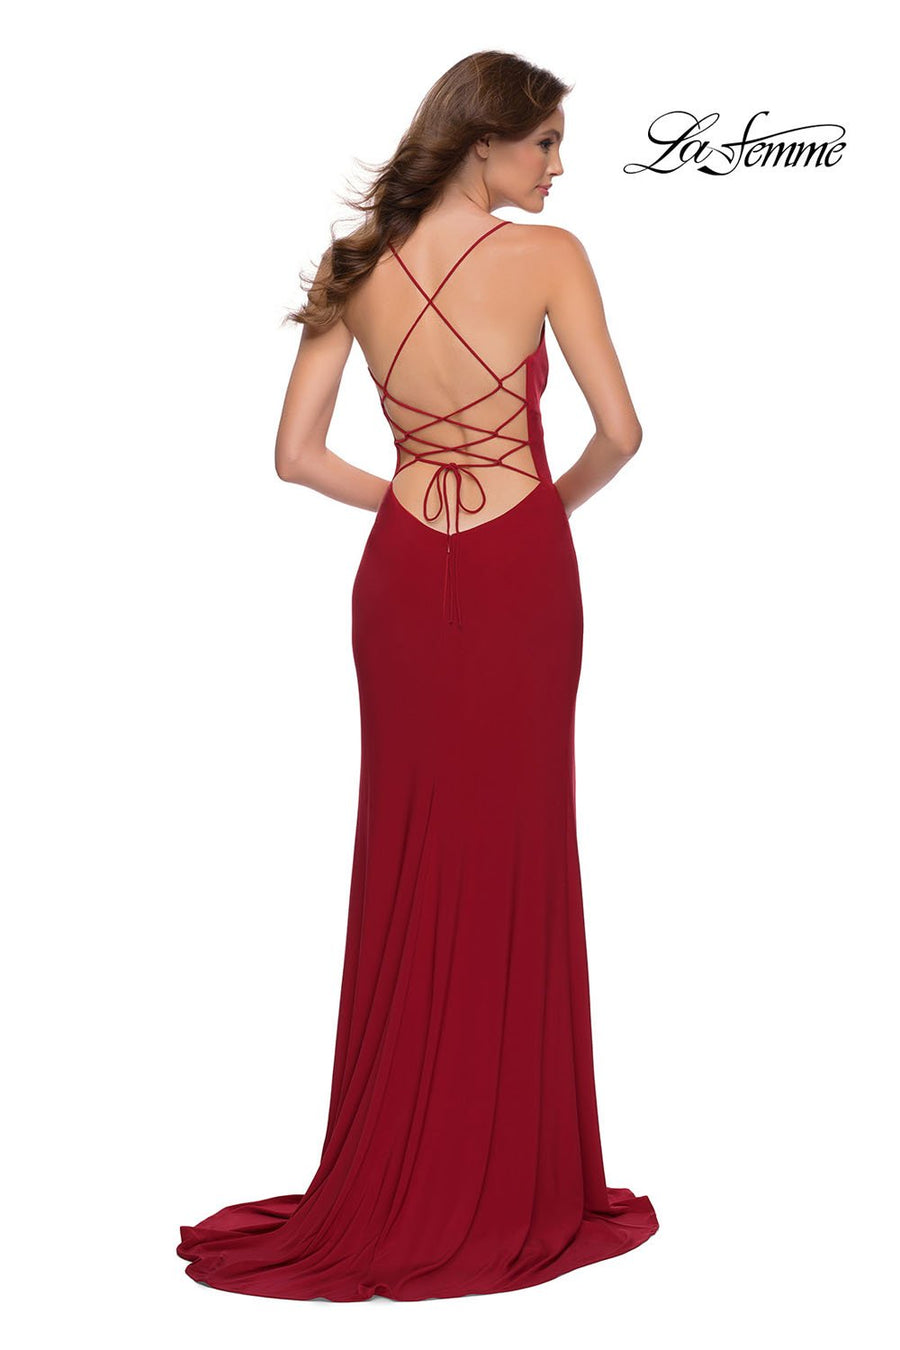 La Femme 29708 prom dress images.  La Femme 29708 is available in these colors: Black, Dark Emerald, Red.